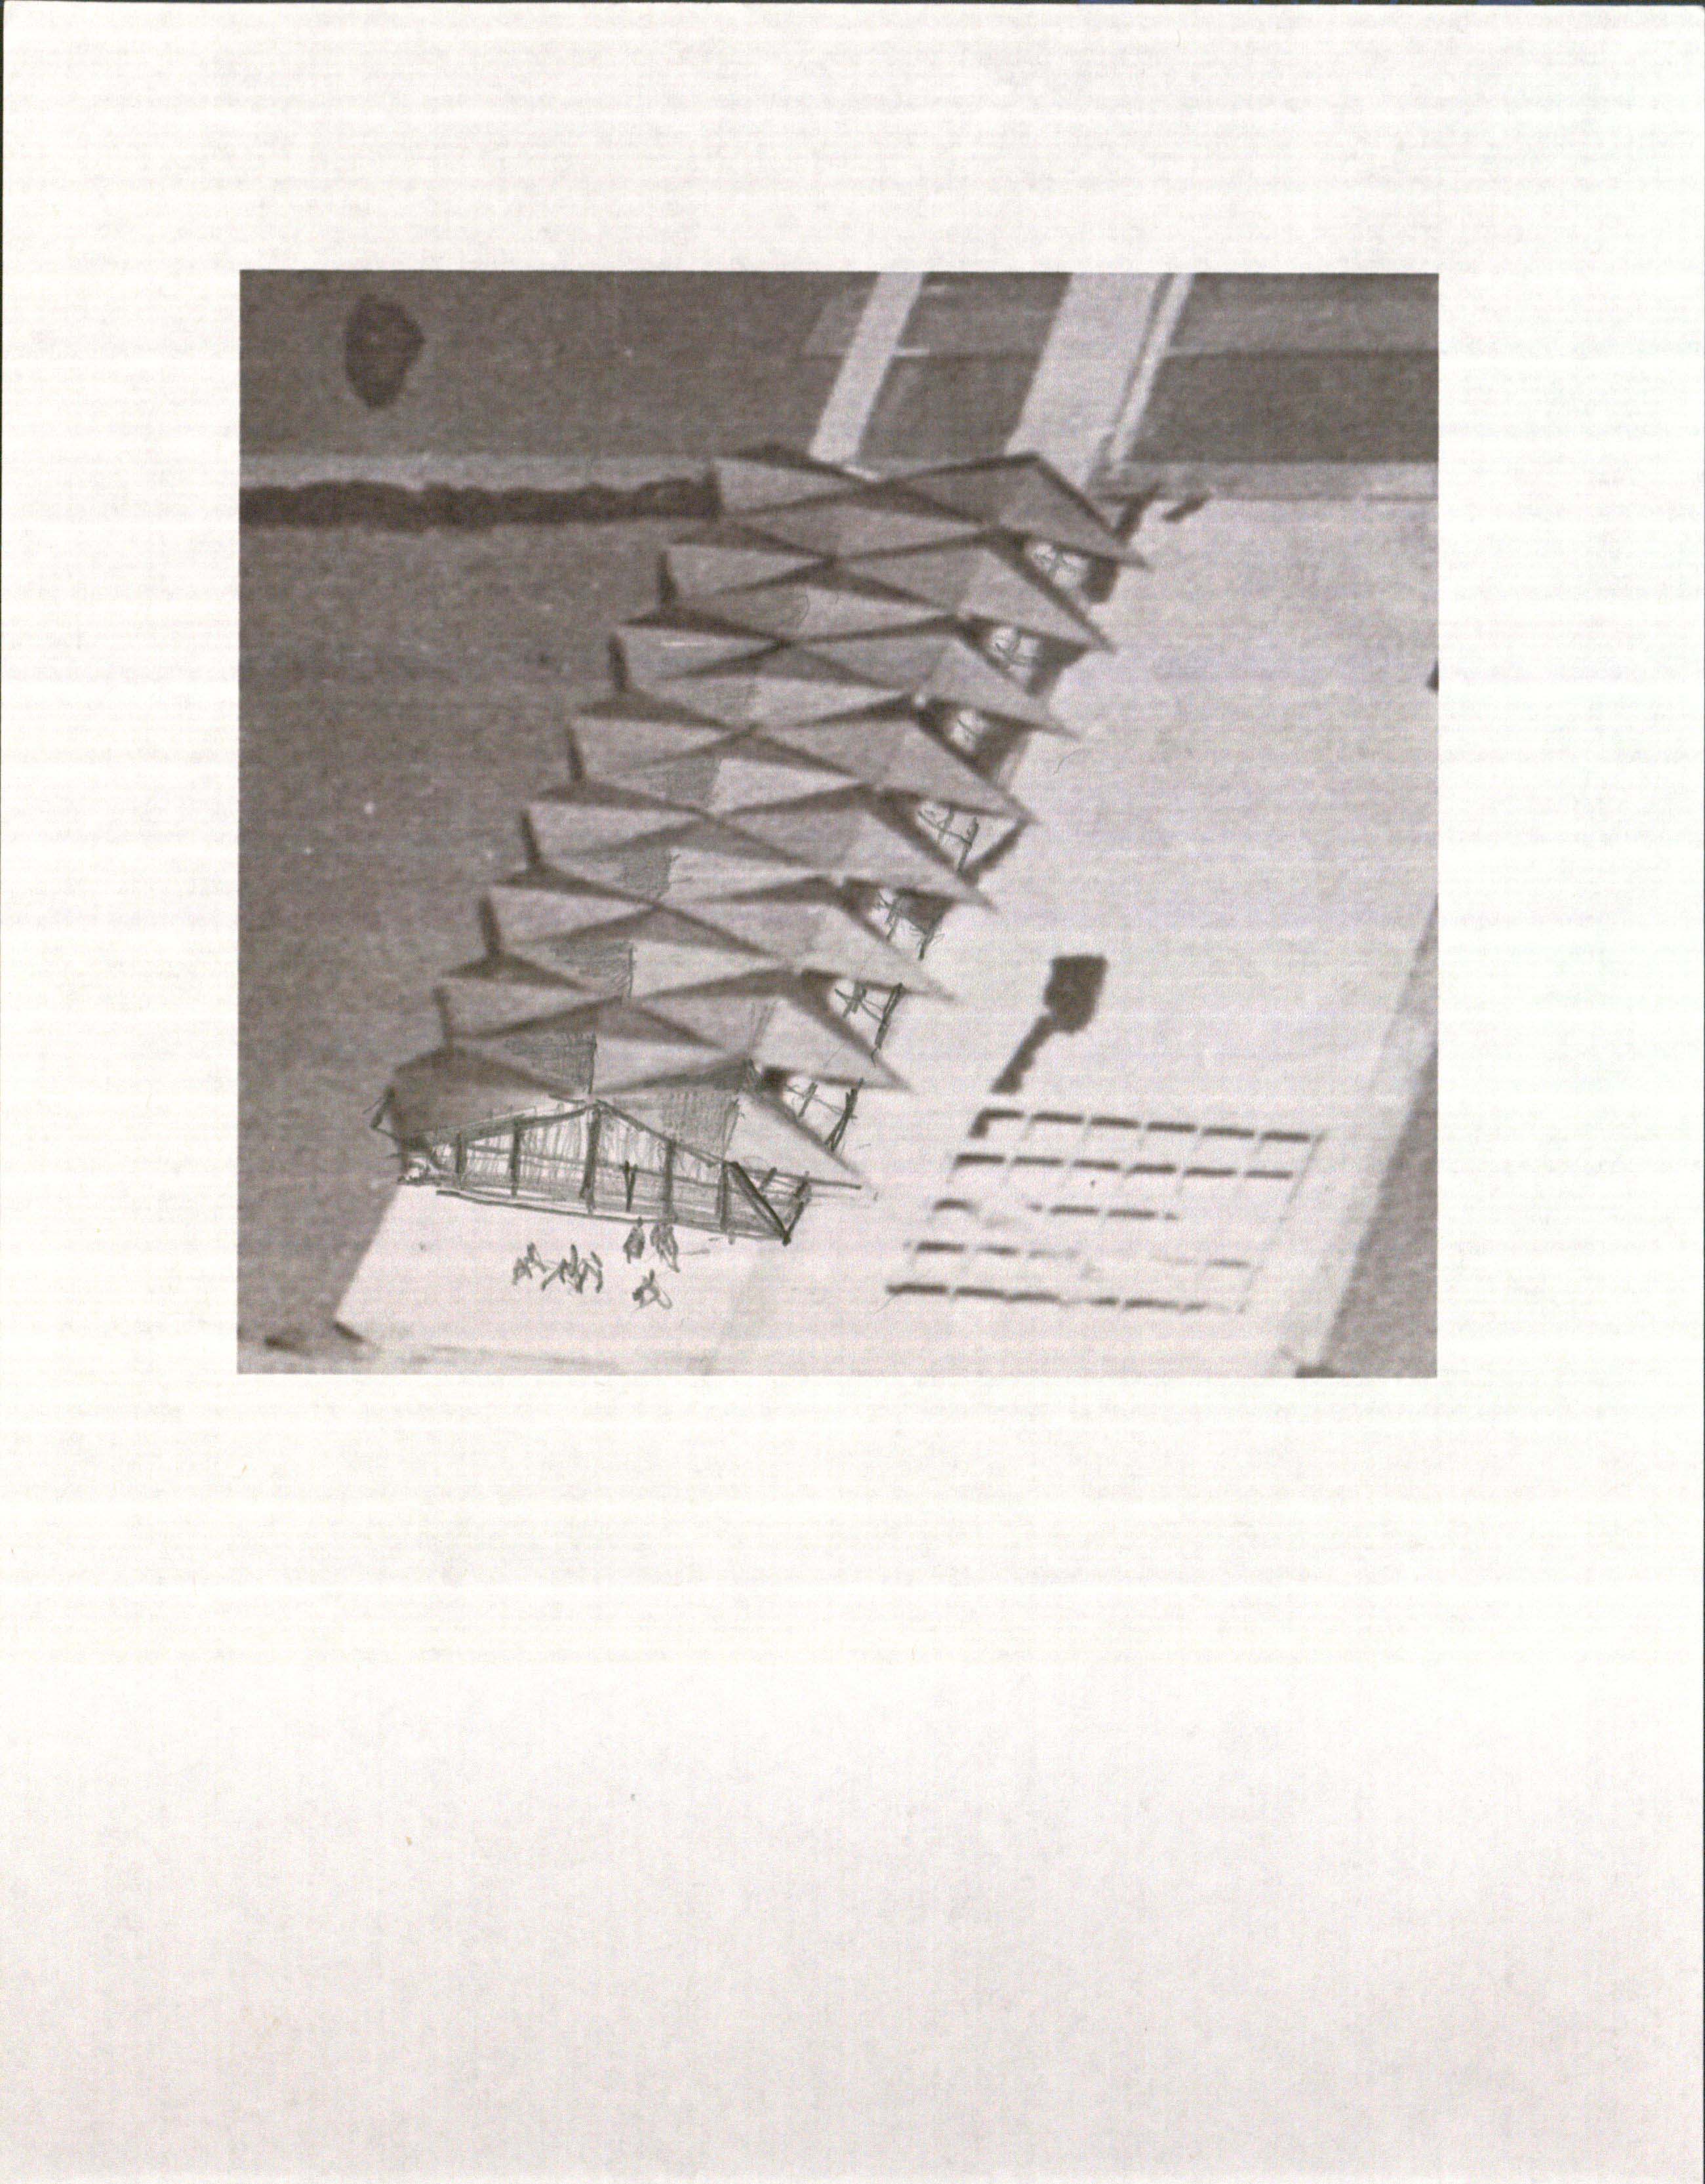 Copy of a photograph showing a detail of the tent structures from the model of the Teaching Hospital. The pint is annotated with sketches added by Hisham Munir.